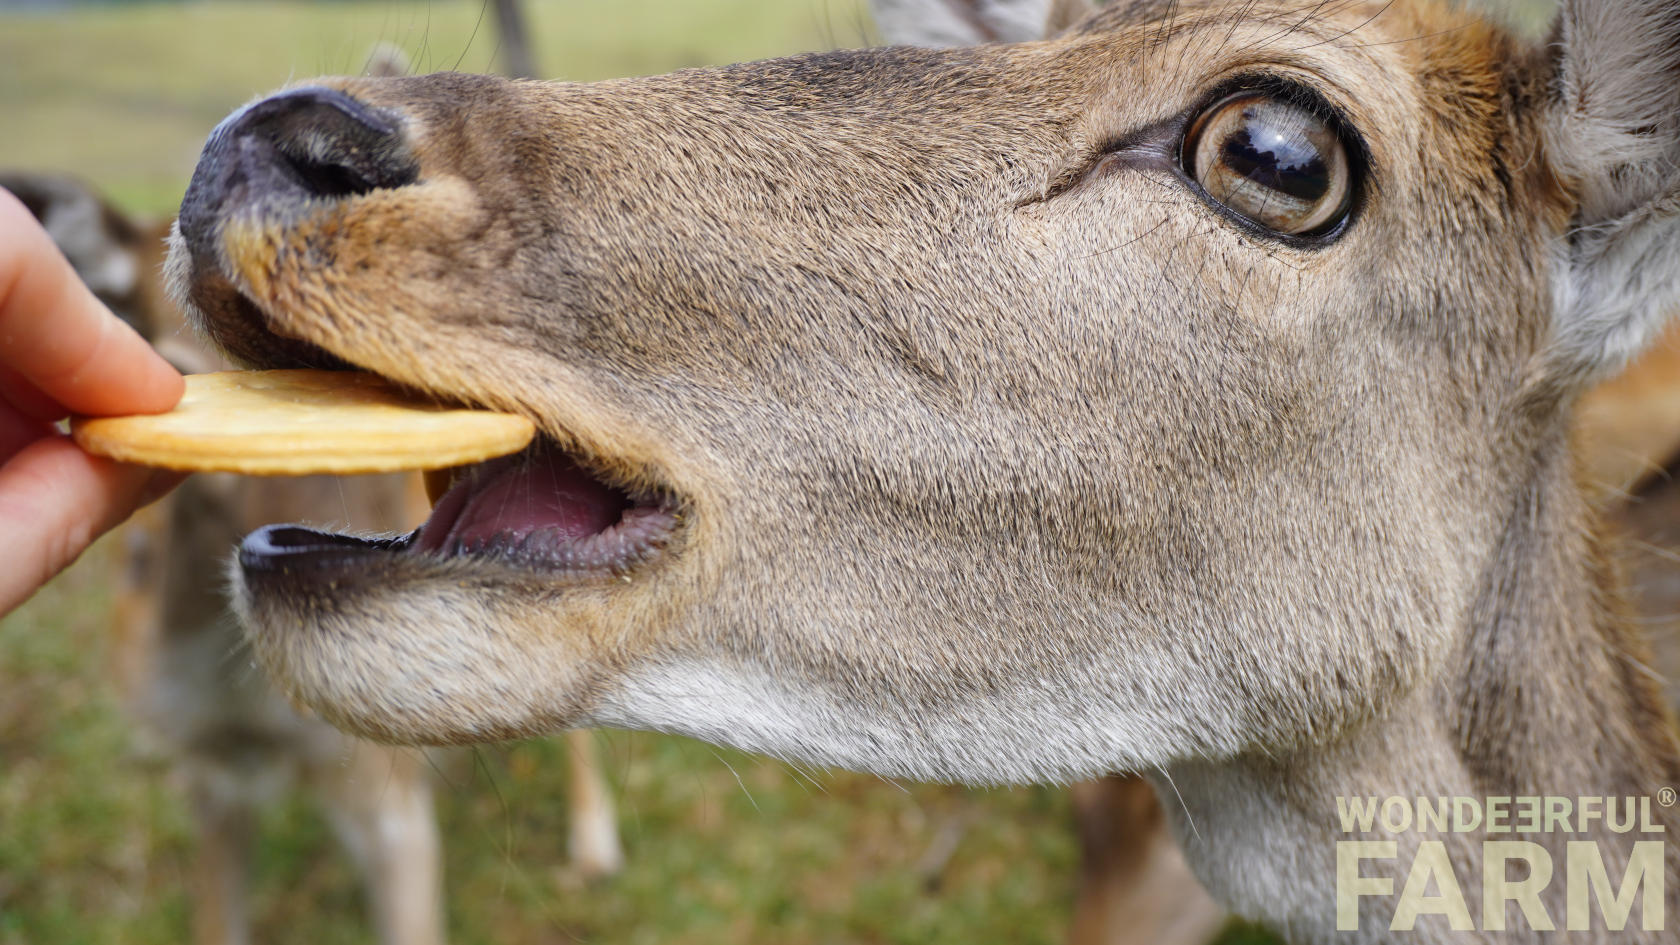 Creatures Inside a Deer's Mouth?